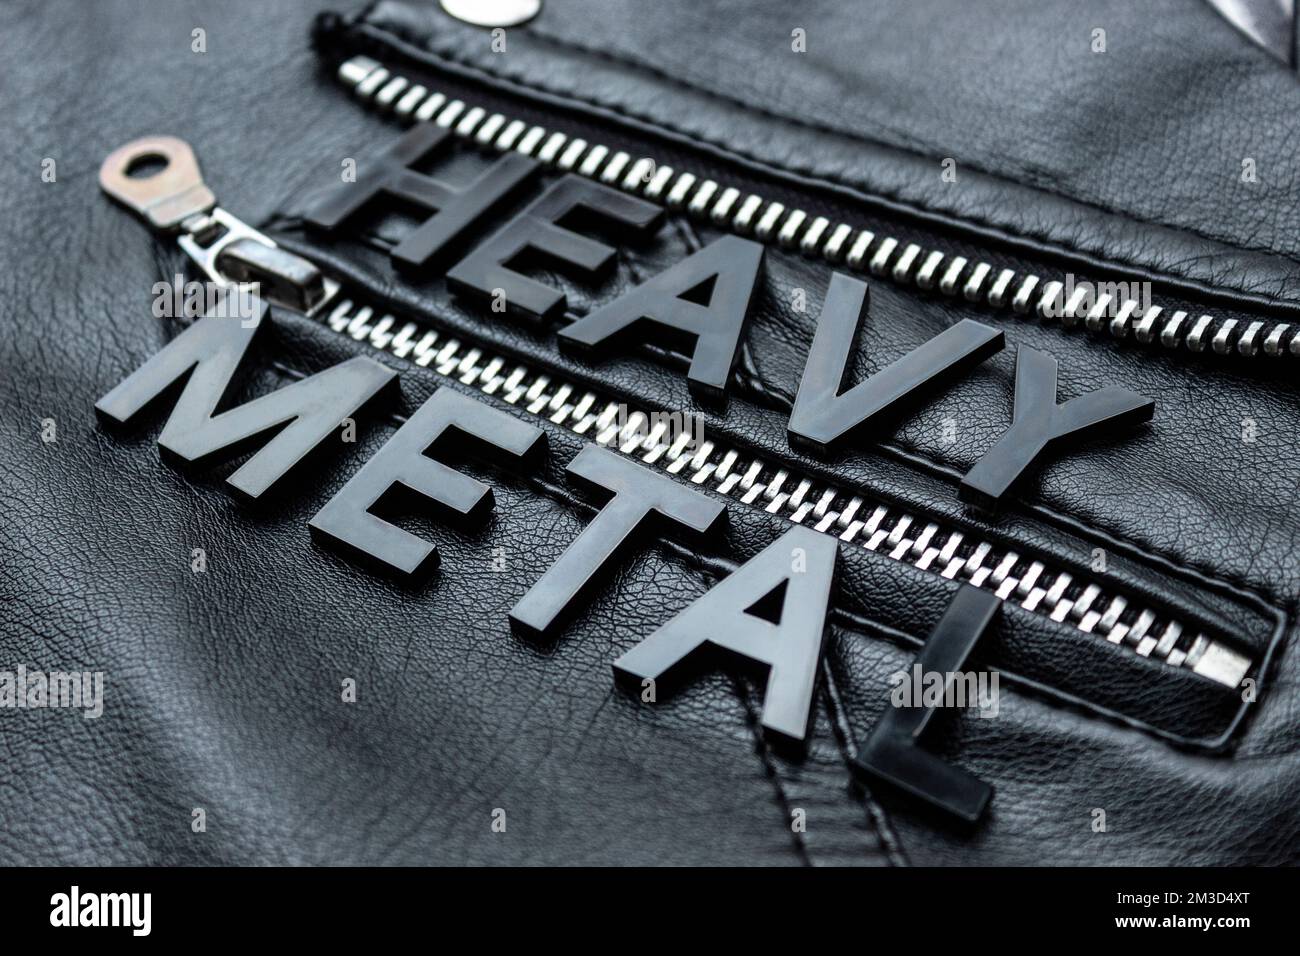 Closeup to a HEAVY METAL black lettering word over a black biker leather jacket. Heavy metal music lovers and fashion concept style Stock Photo